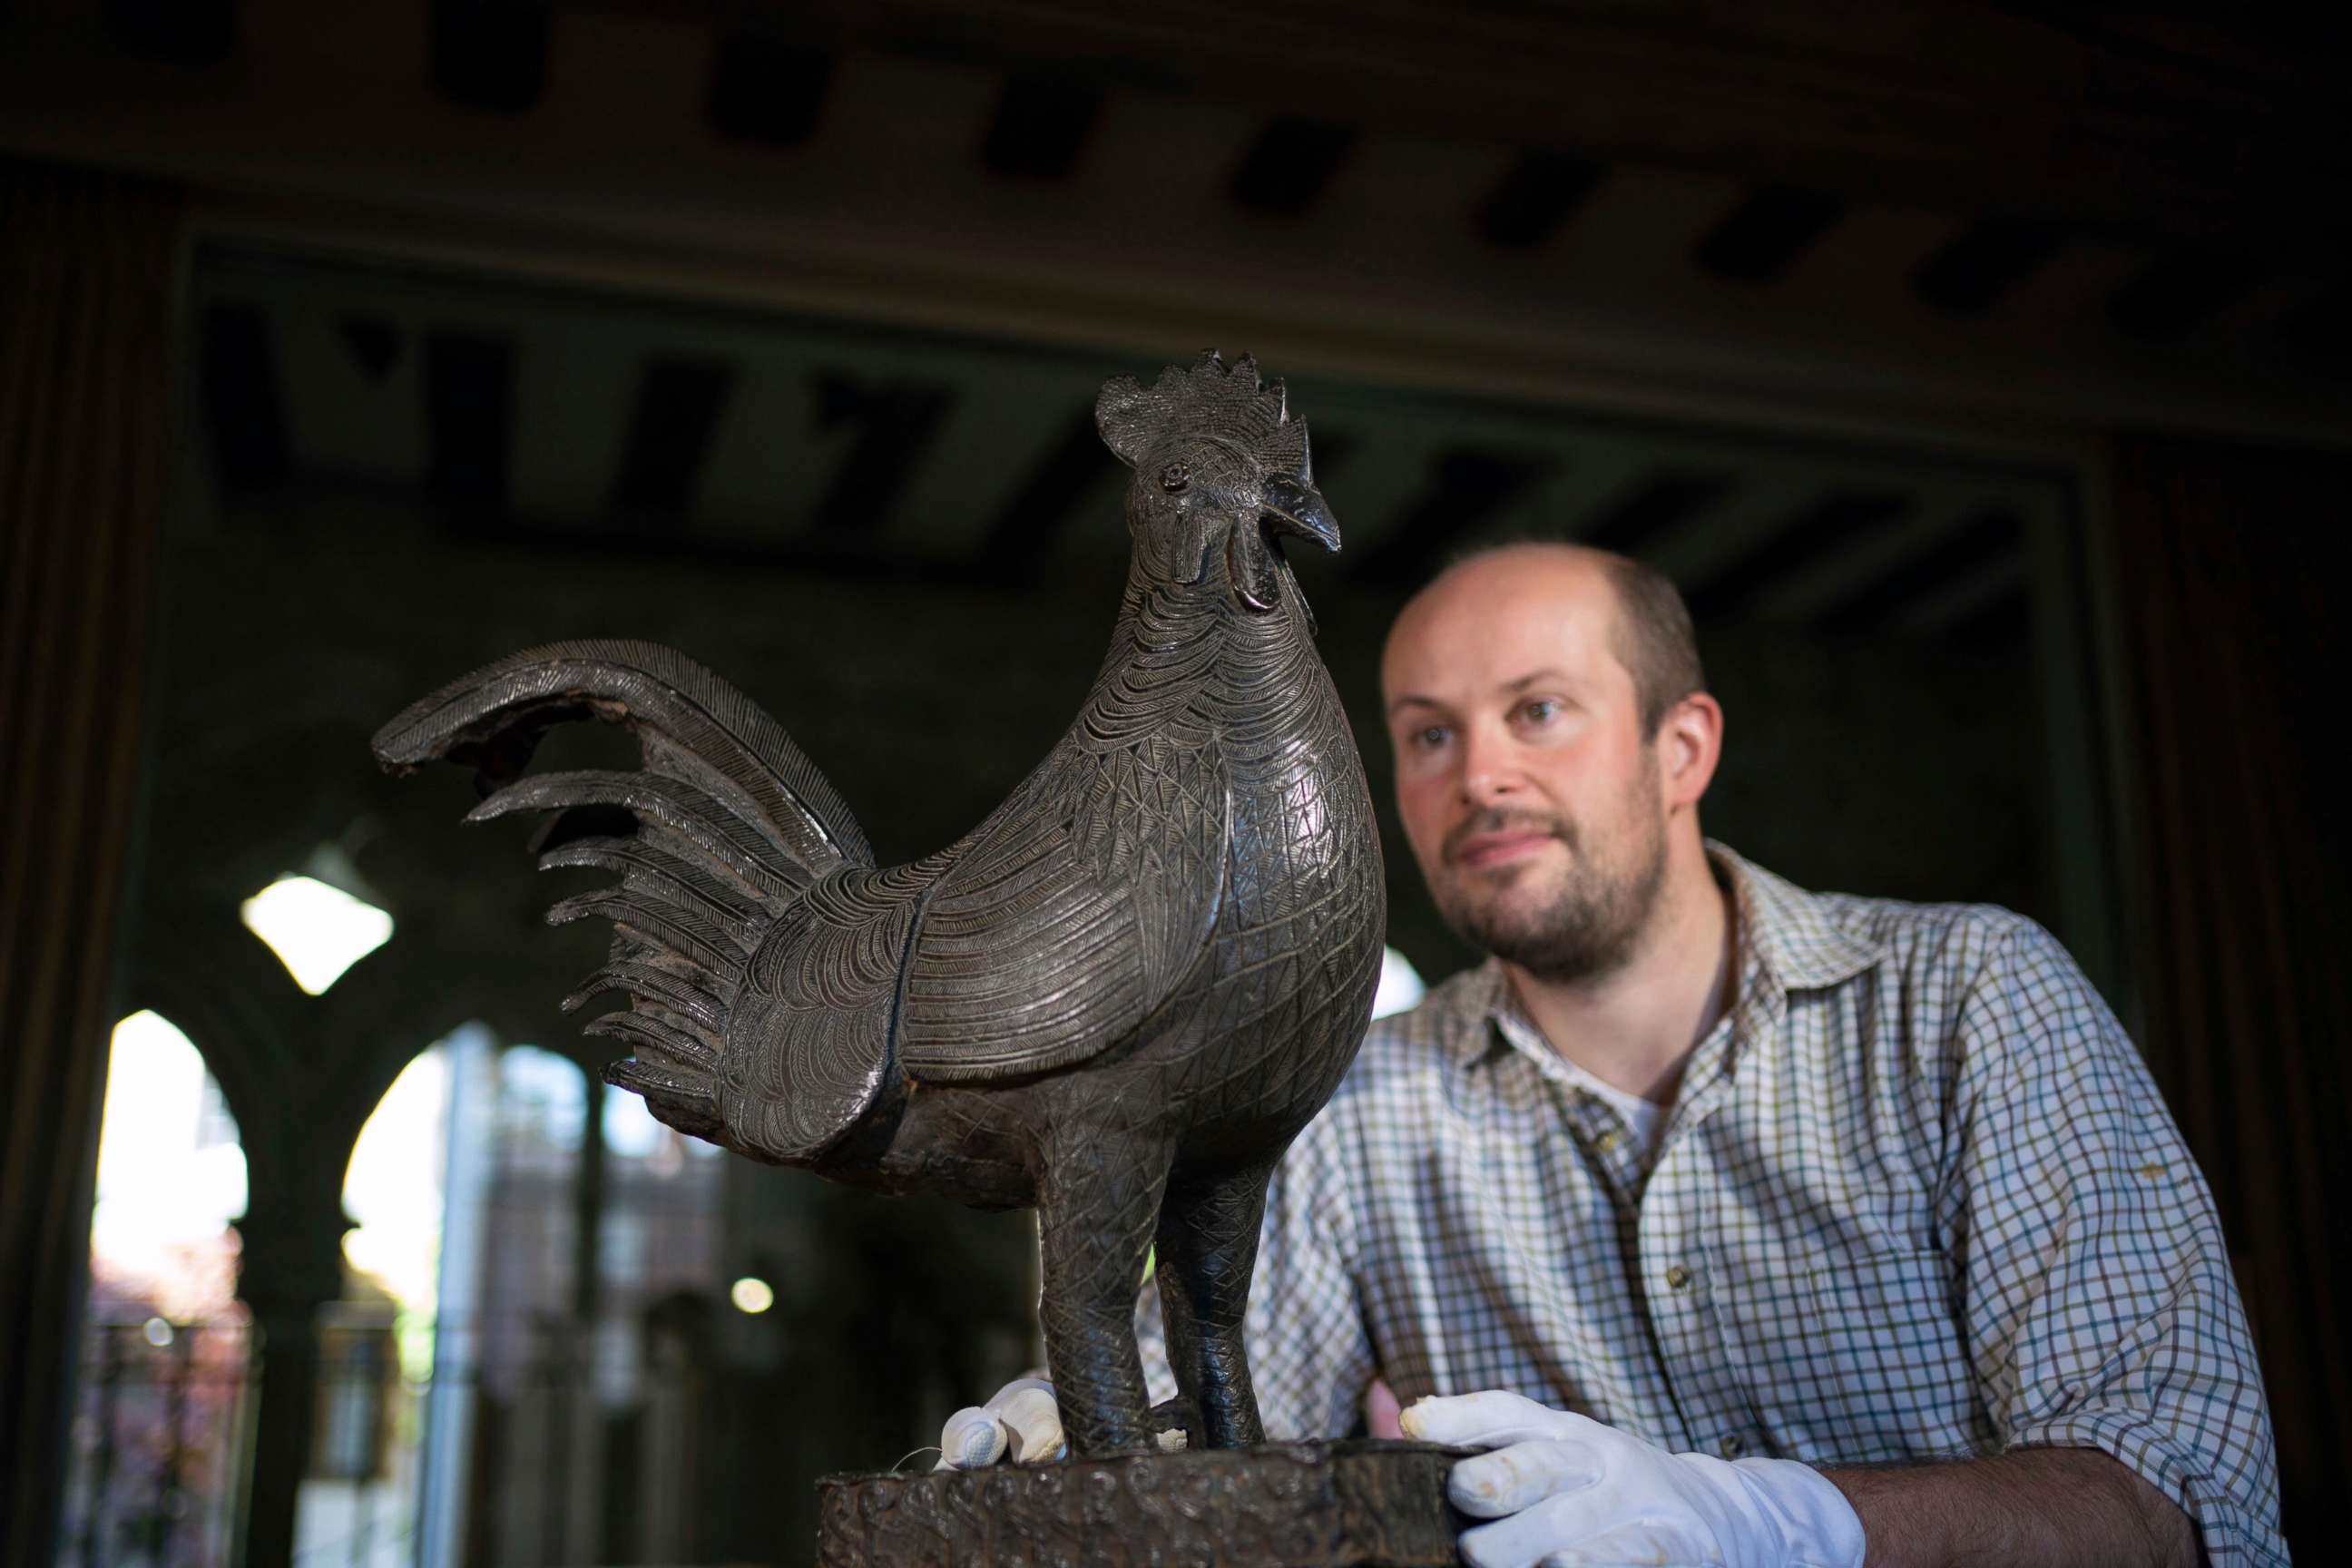 PHOTO: Archivist Robert Athol looks at a bronze statue of a cockerel called The Okukor, at Jesus College, University of Cambridge, England, Oct. 15, 2021.